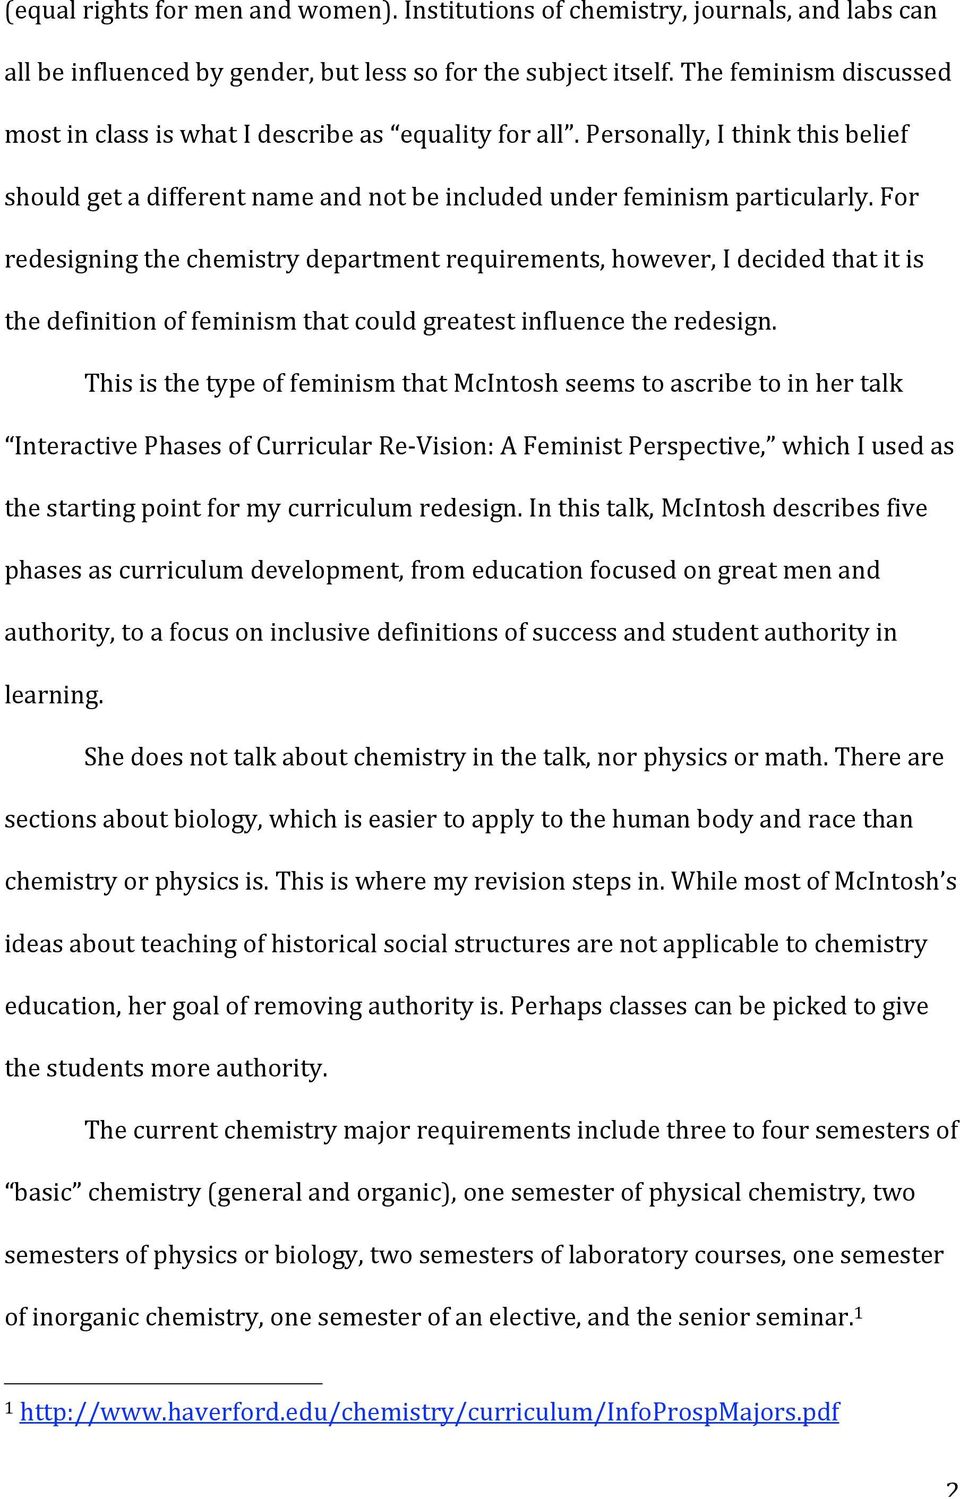 For redesigning the chemistry department requirements, however, I decided that it is the definition of feminism that could greatest influence the redesign.